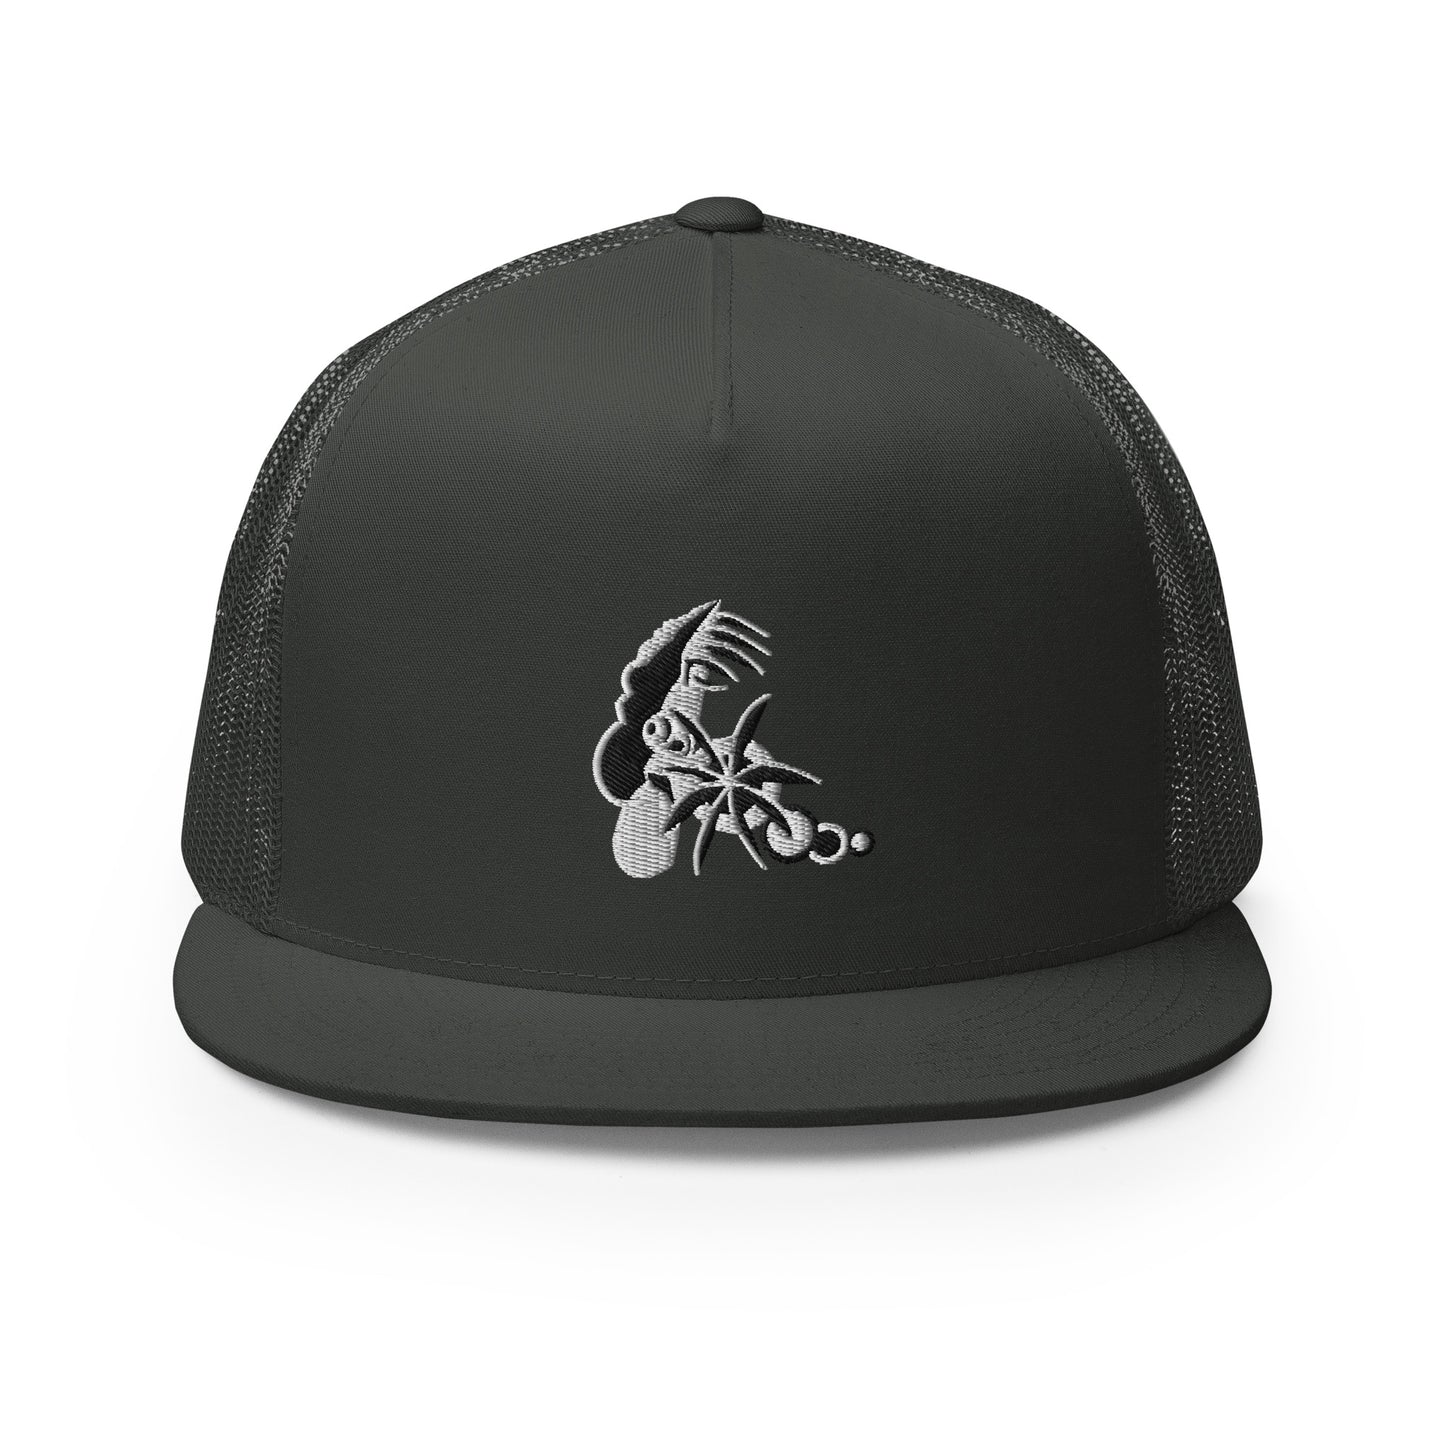 "The After Life" Trucker Cap